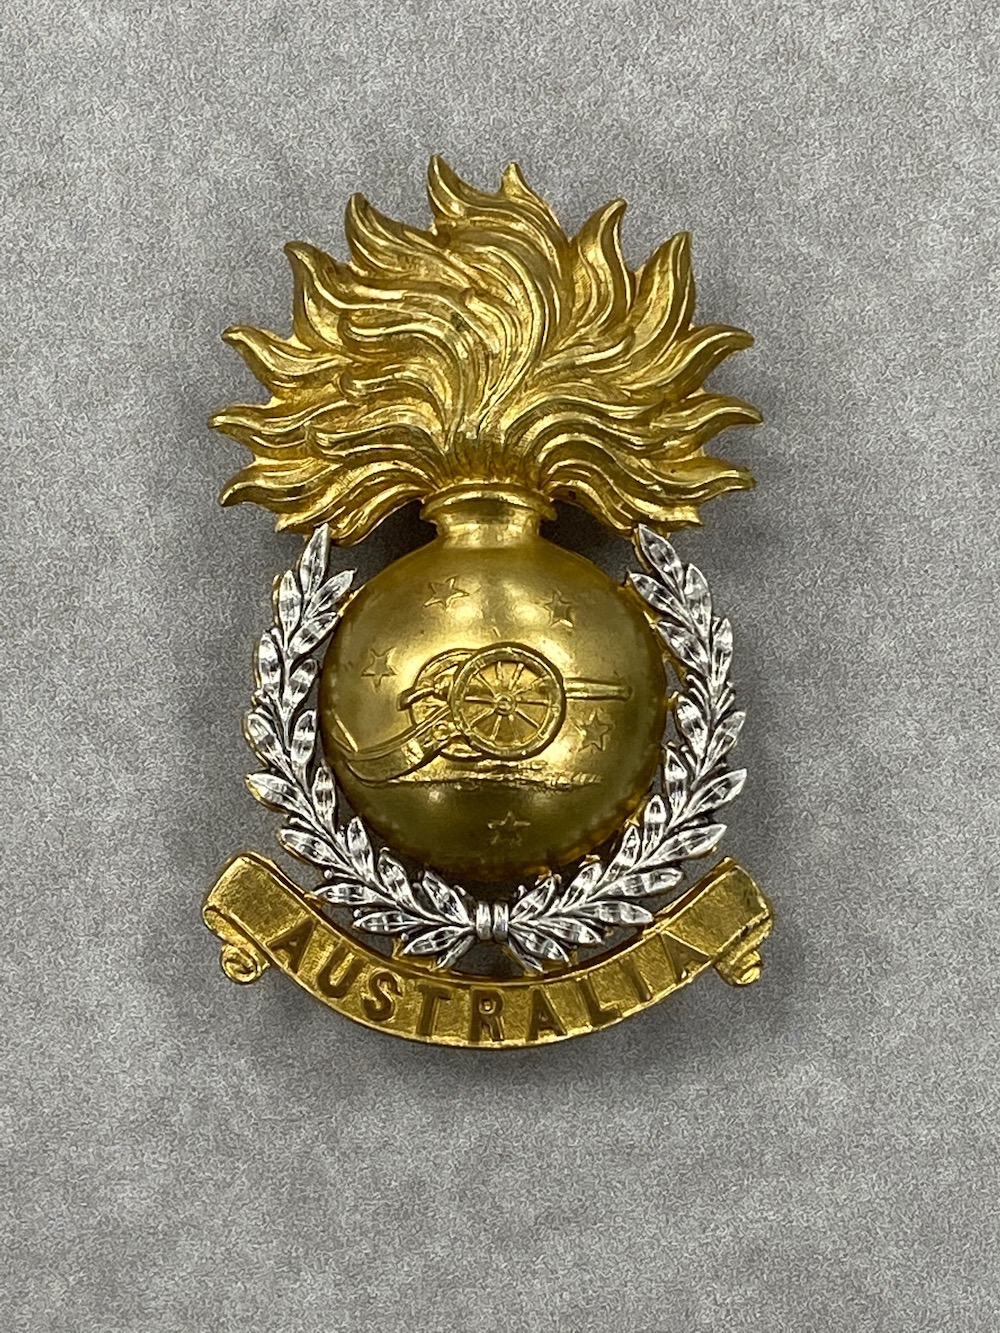 A Large Private Collection Of Over 2000 Cap Badges And Buttons Sold Ś30.000